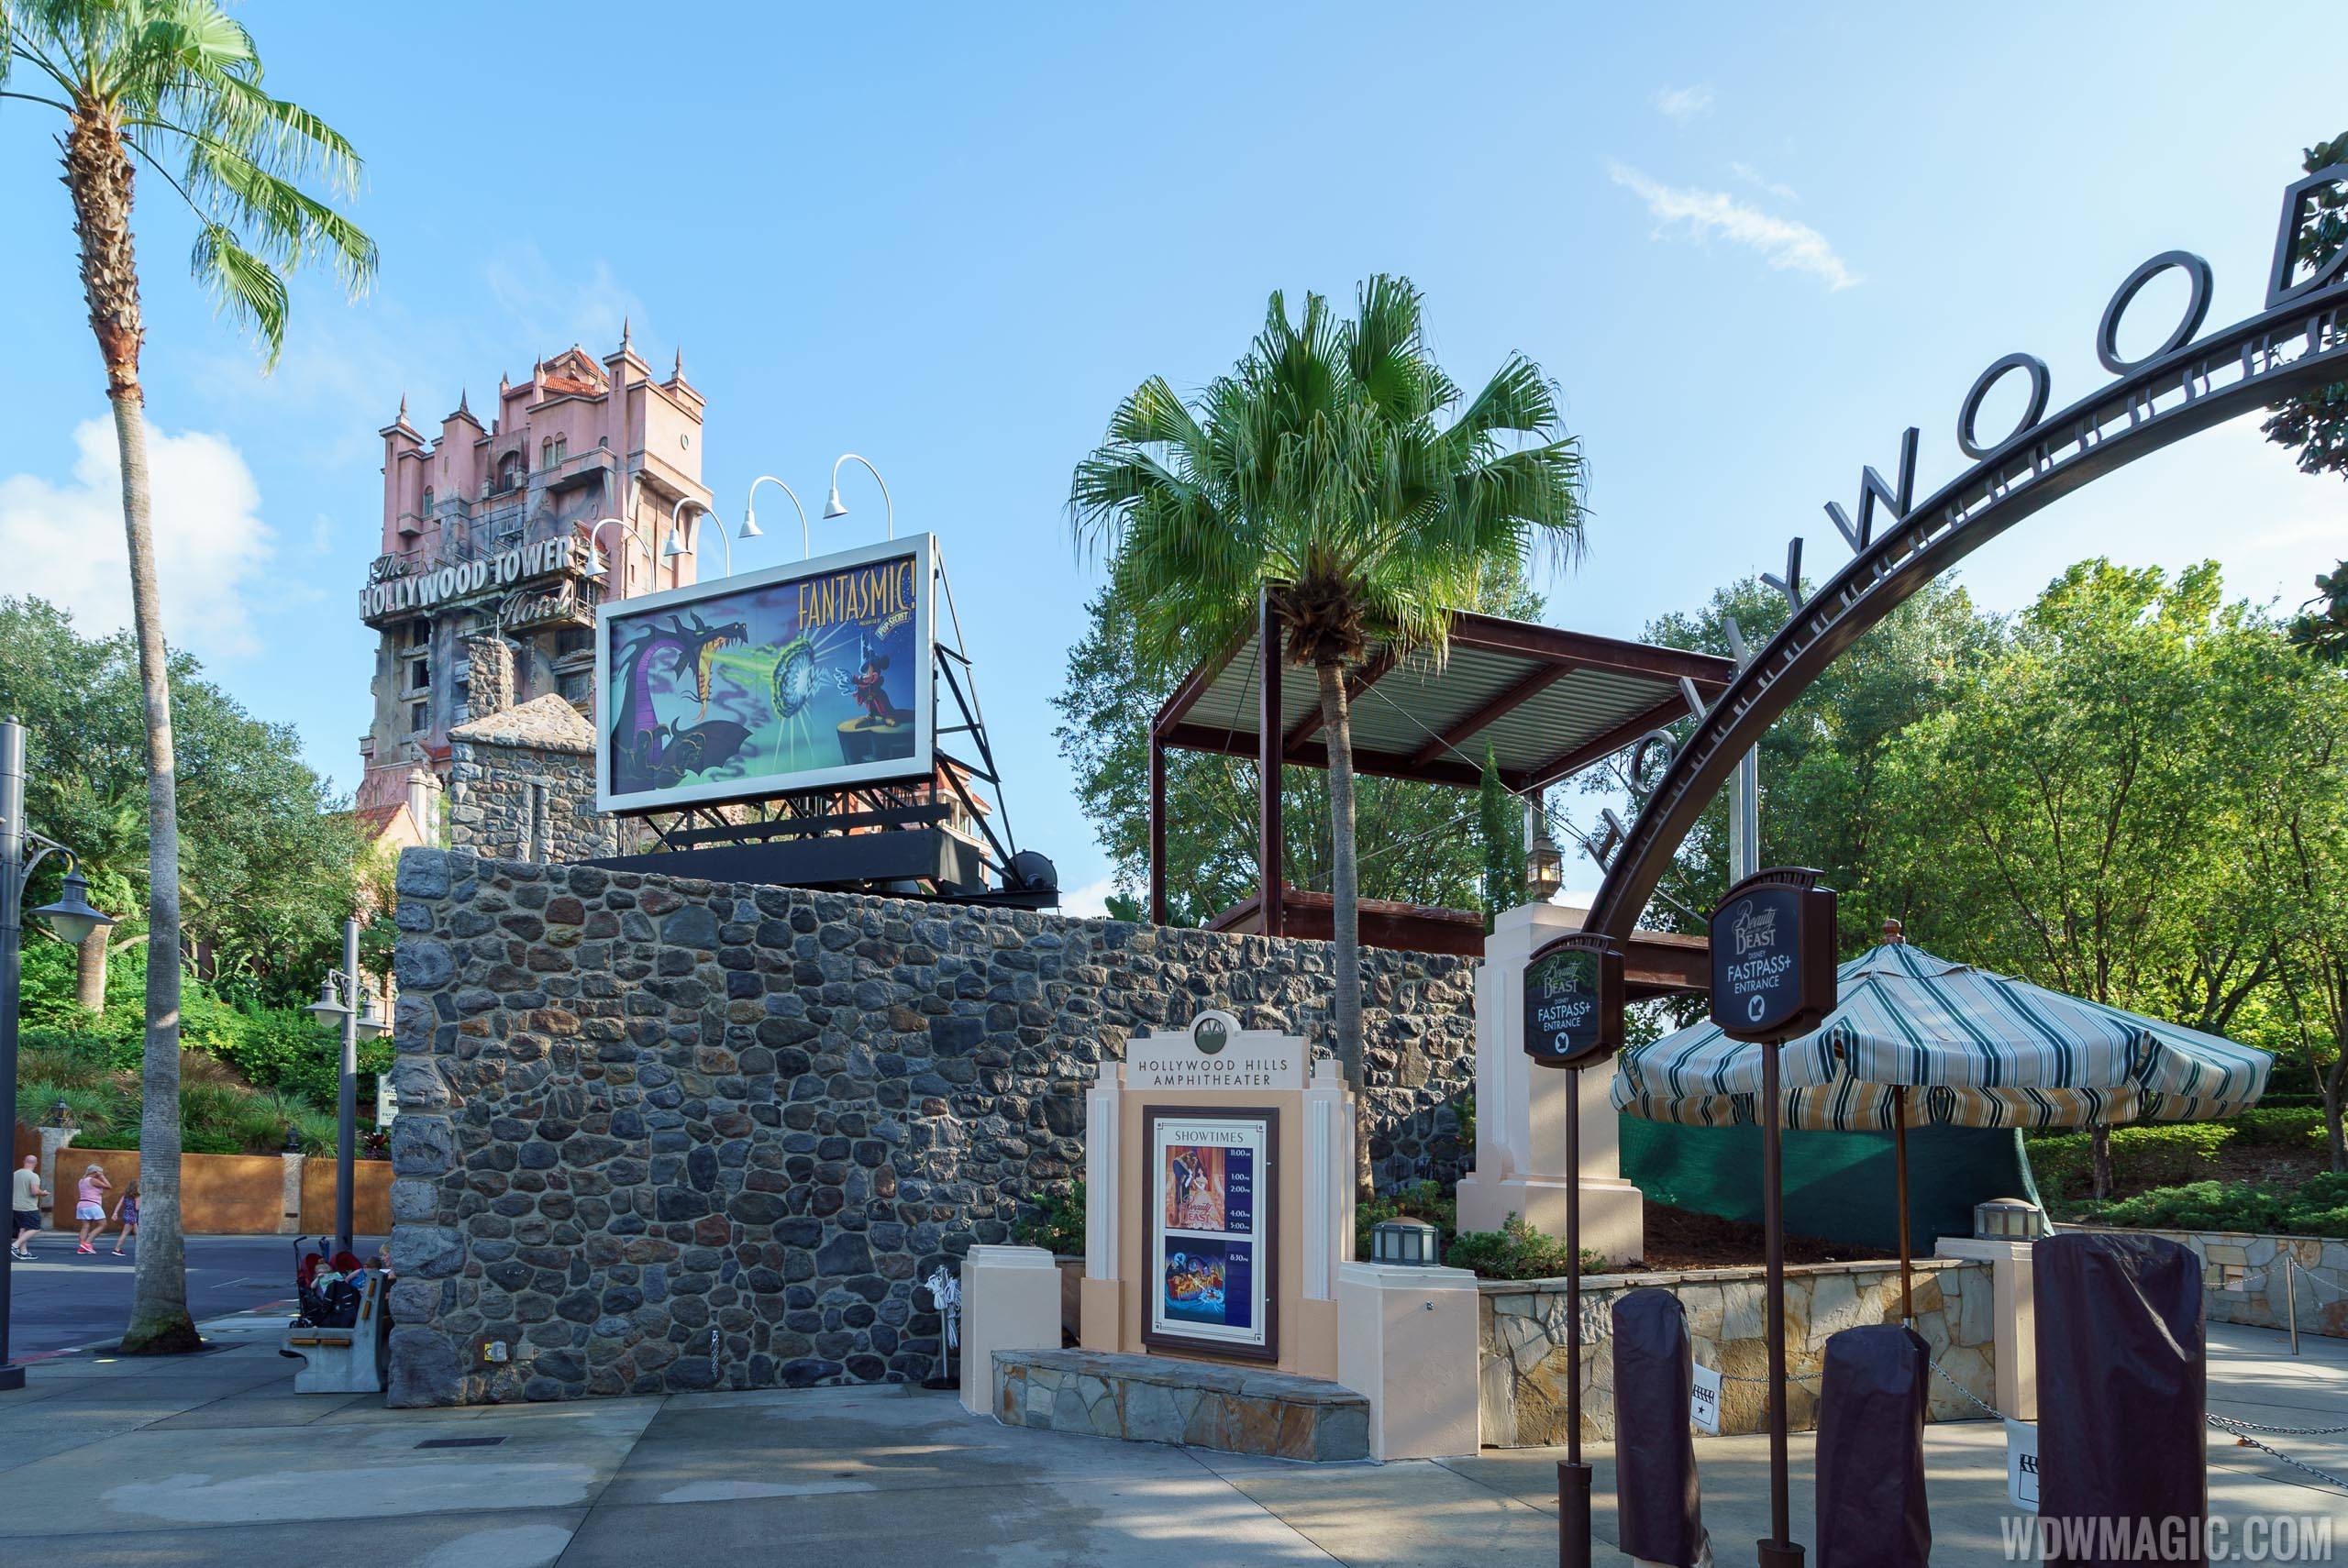 PHOTOS - Projector platforms under construction for new Sunset Seasons Greetings show